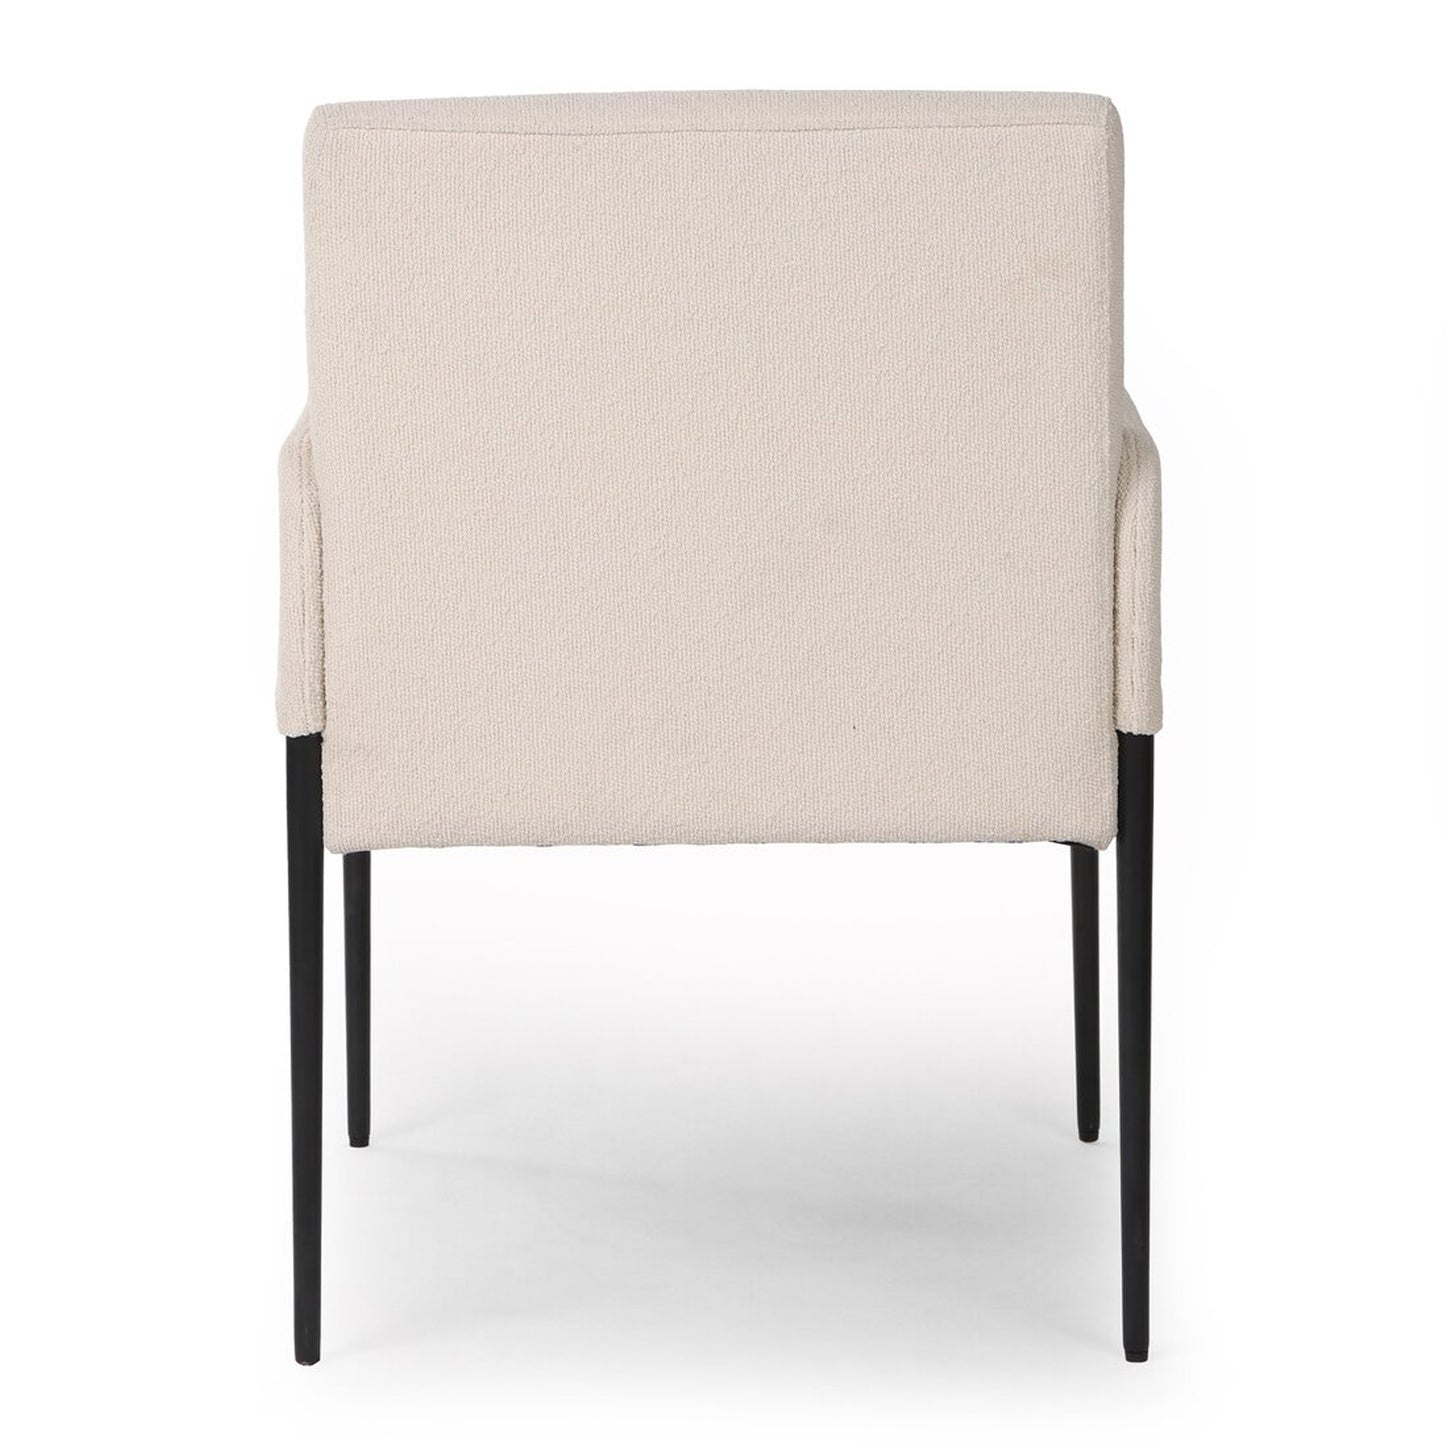 Max Upholstered Dining Chair with Armrest - IONS DESIGN